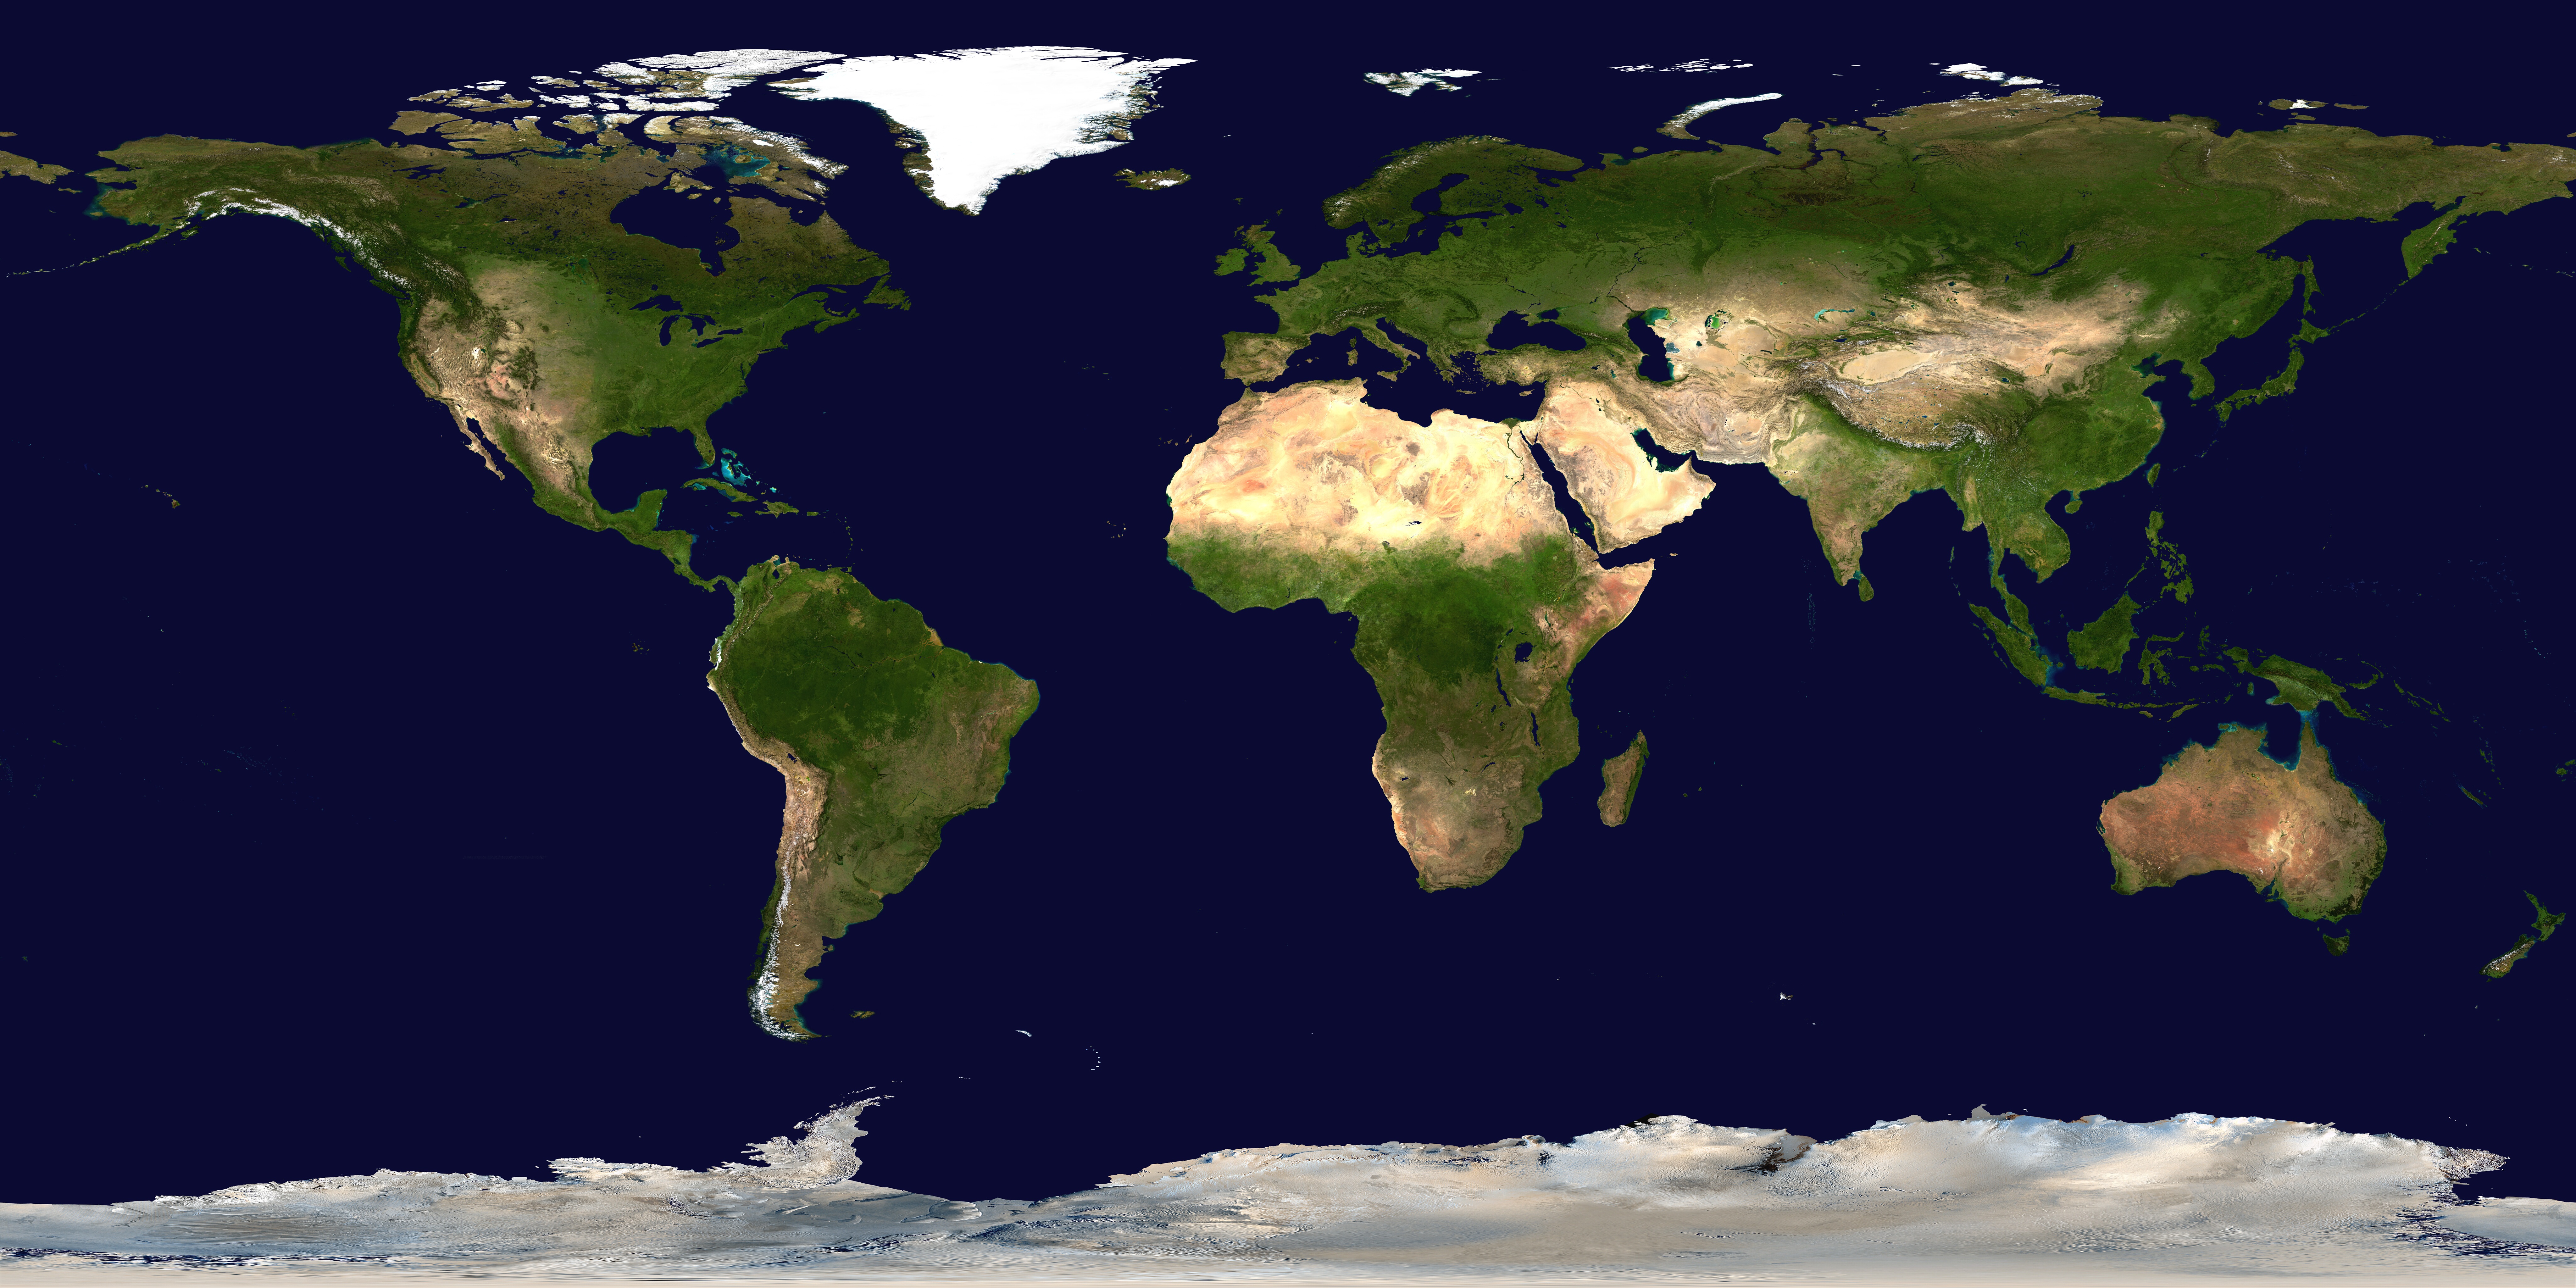 File:Whole world - land and oceans.jpg - Wikipedia